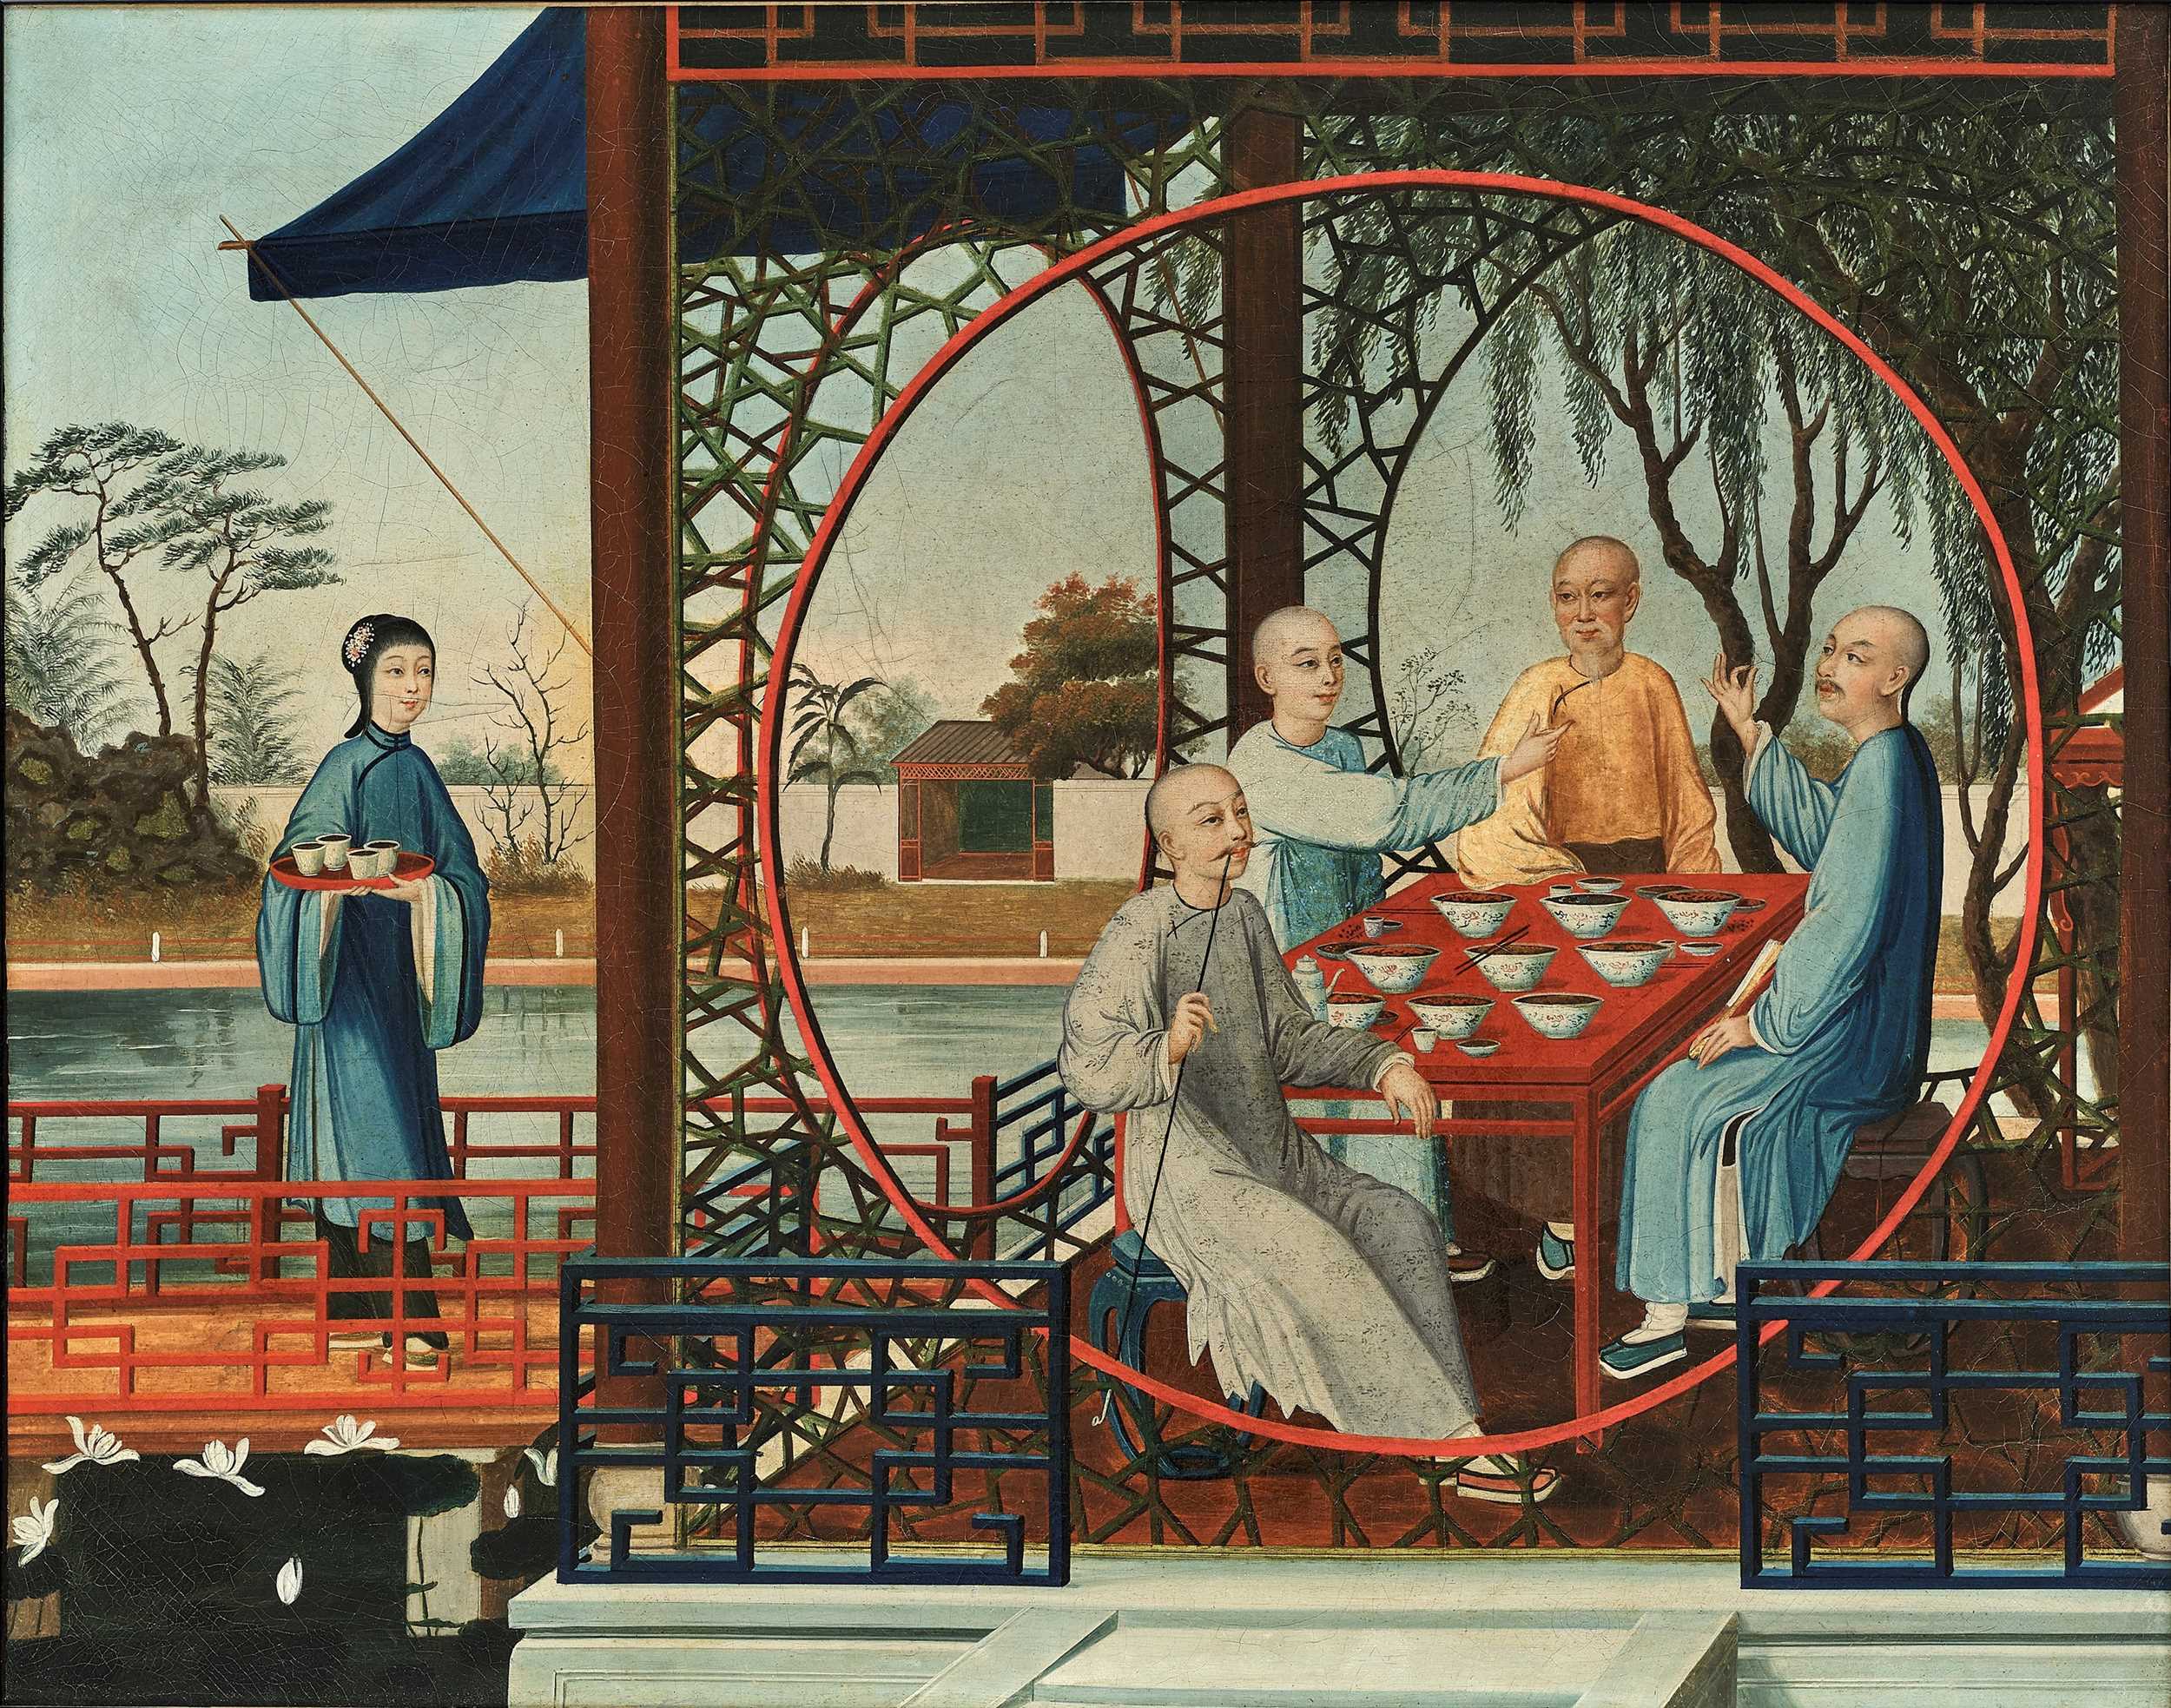 Lot 195 - ‘A RELAXING DINNER’, OIL ON CANVAS, CHINESE SCHOOL, QING DYNASTY